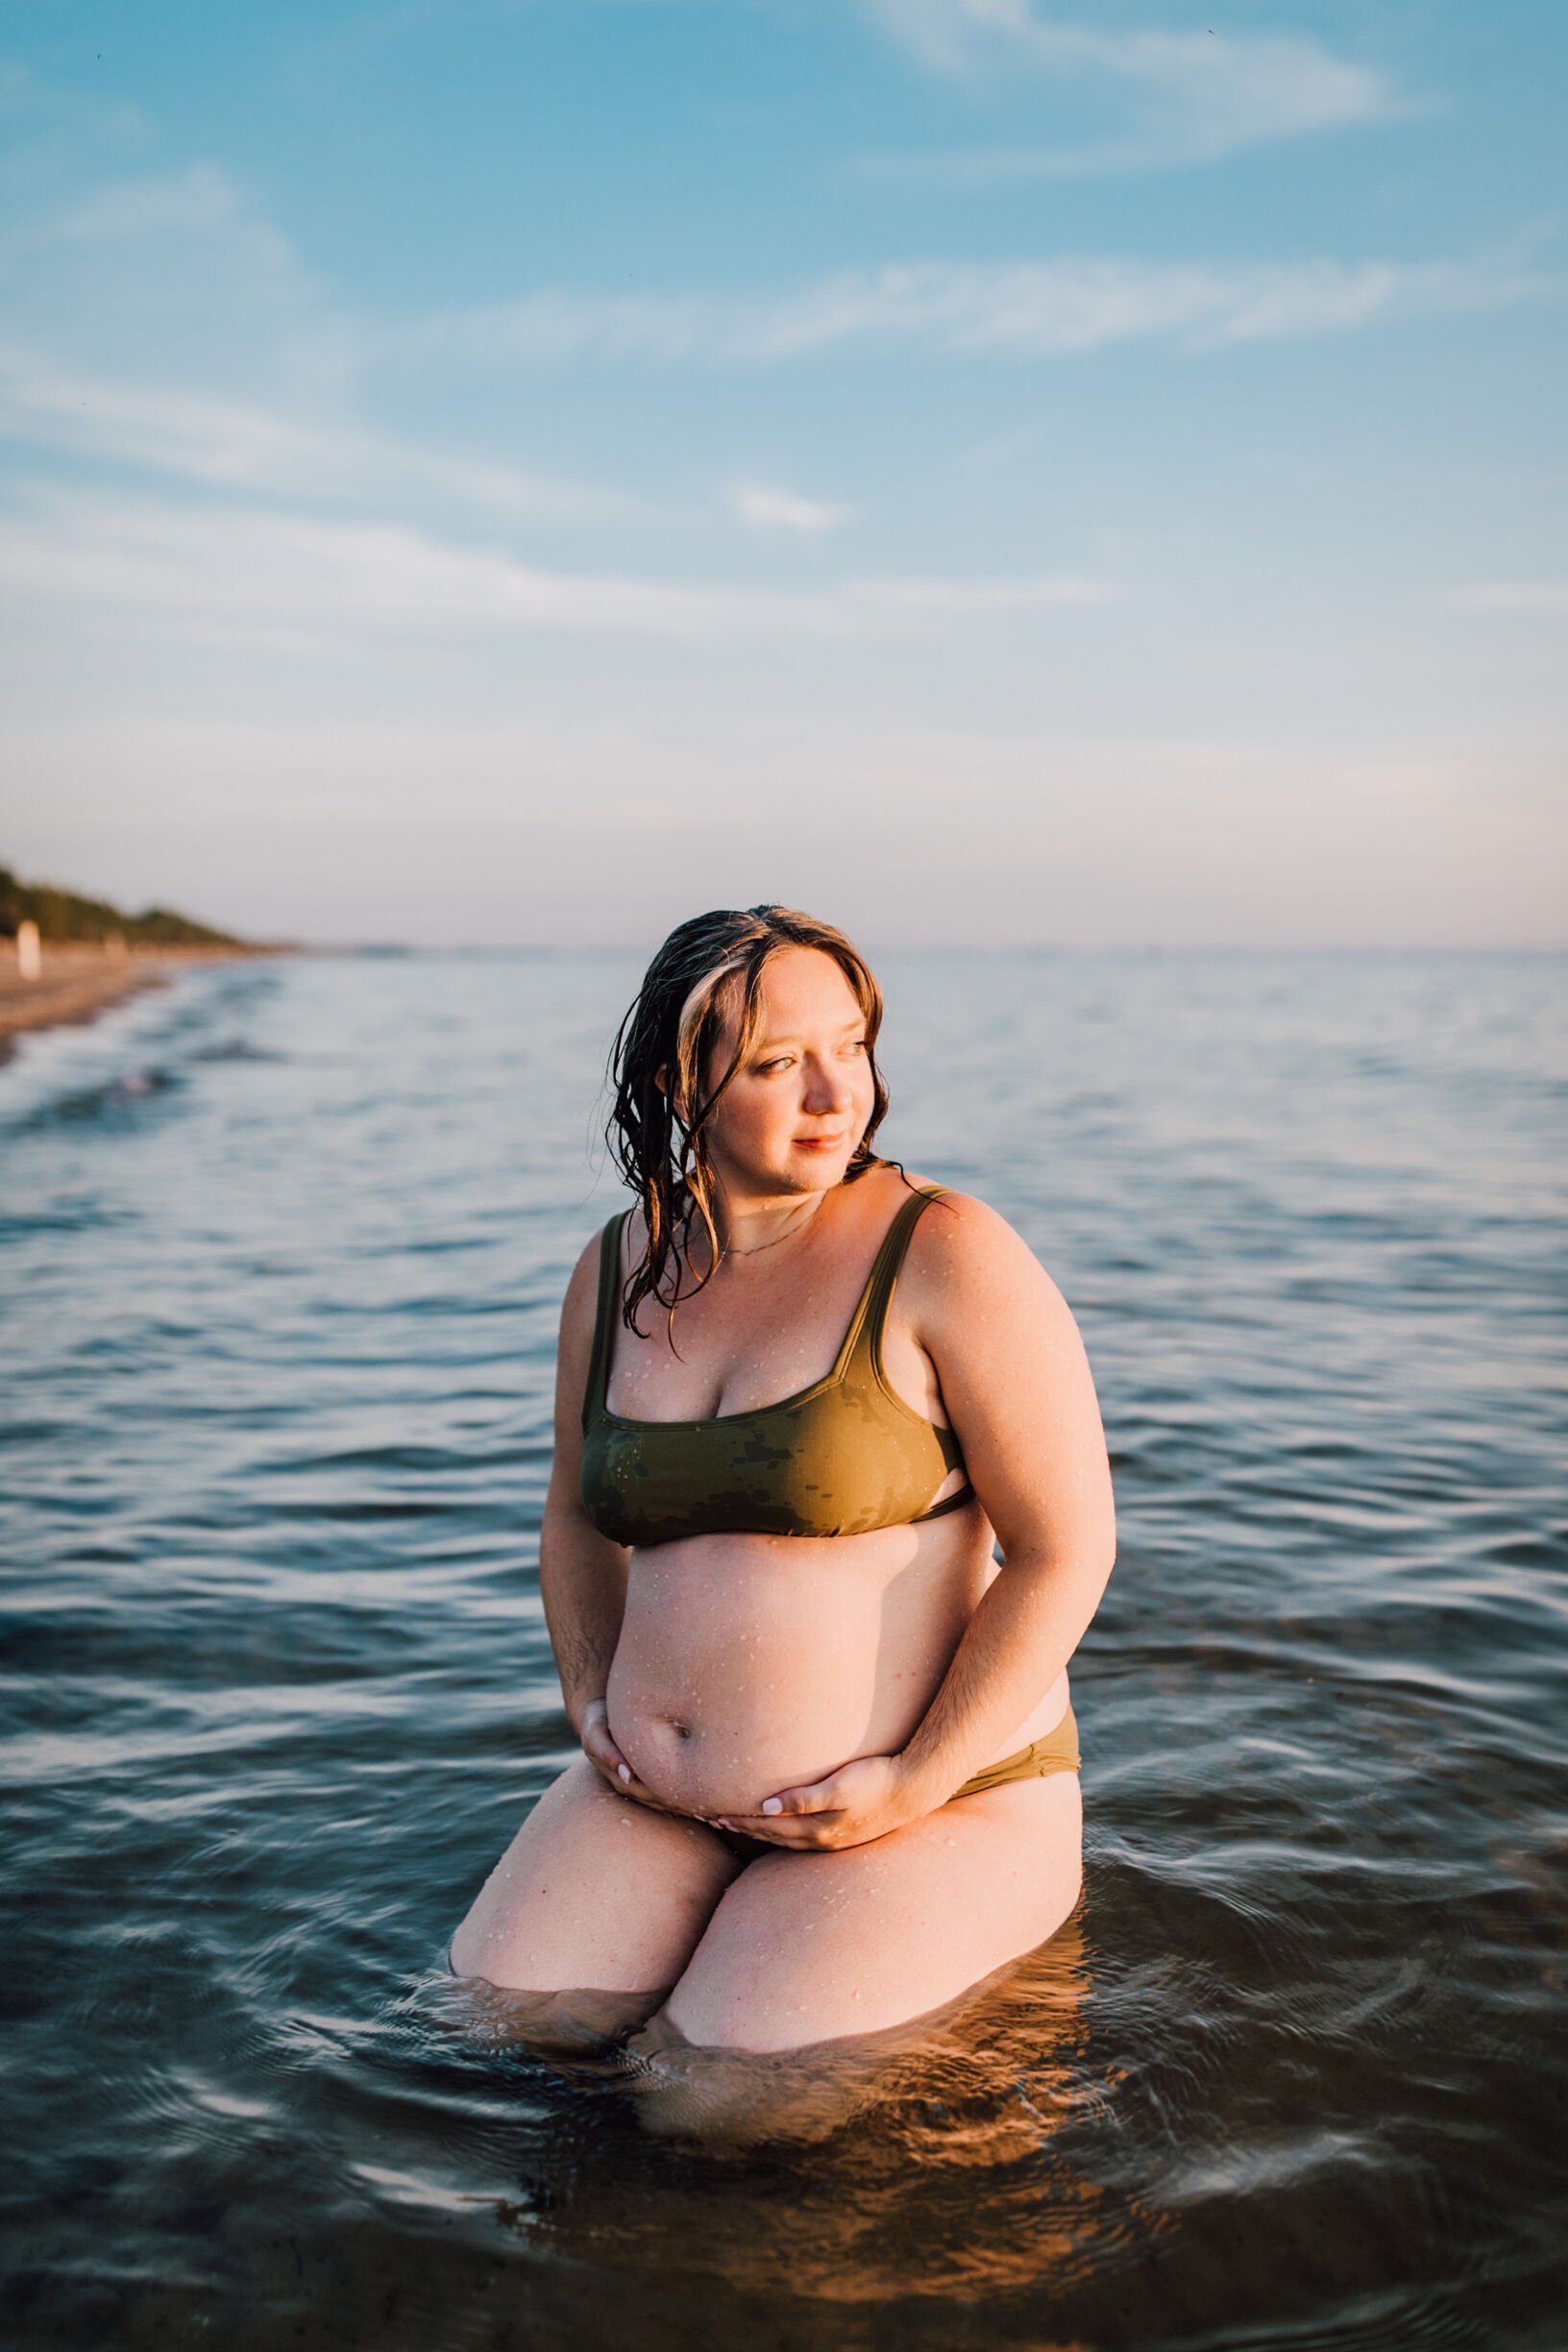  A woman looks off to the side during her maternity photoshoot, southwick beach 